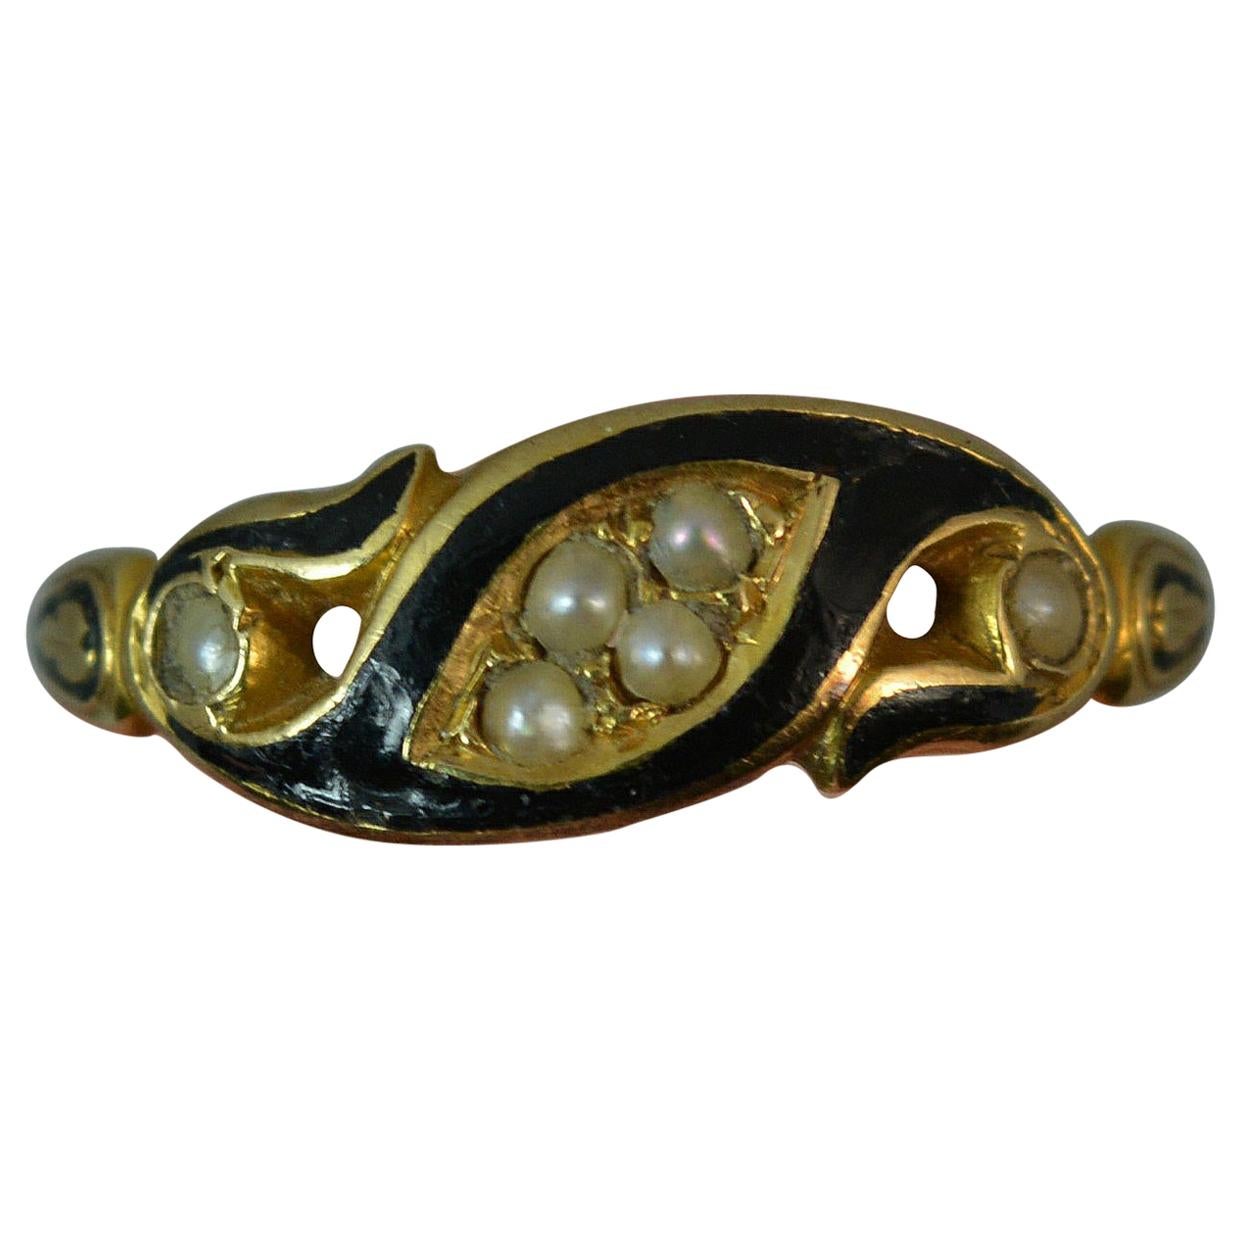 Victorian 18 Carat Gold Enamel and Pearl Mourning Band Ring